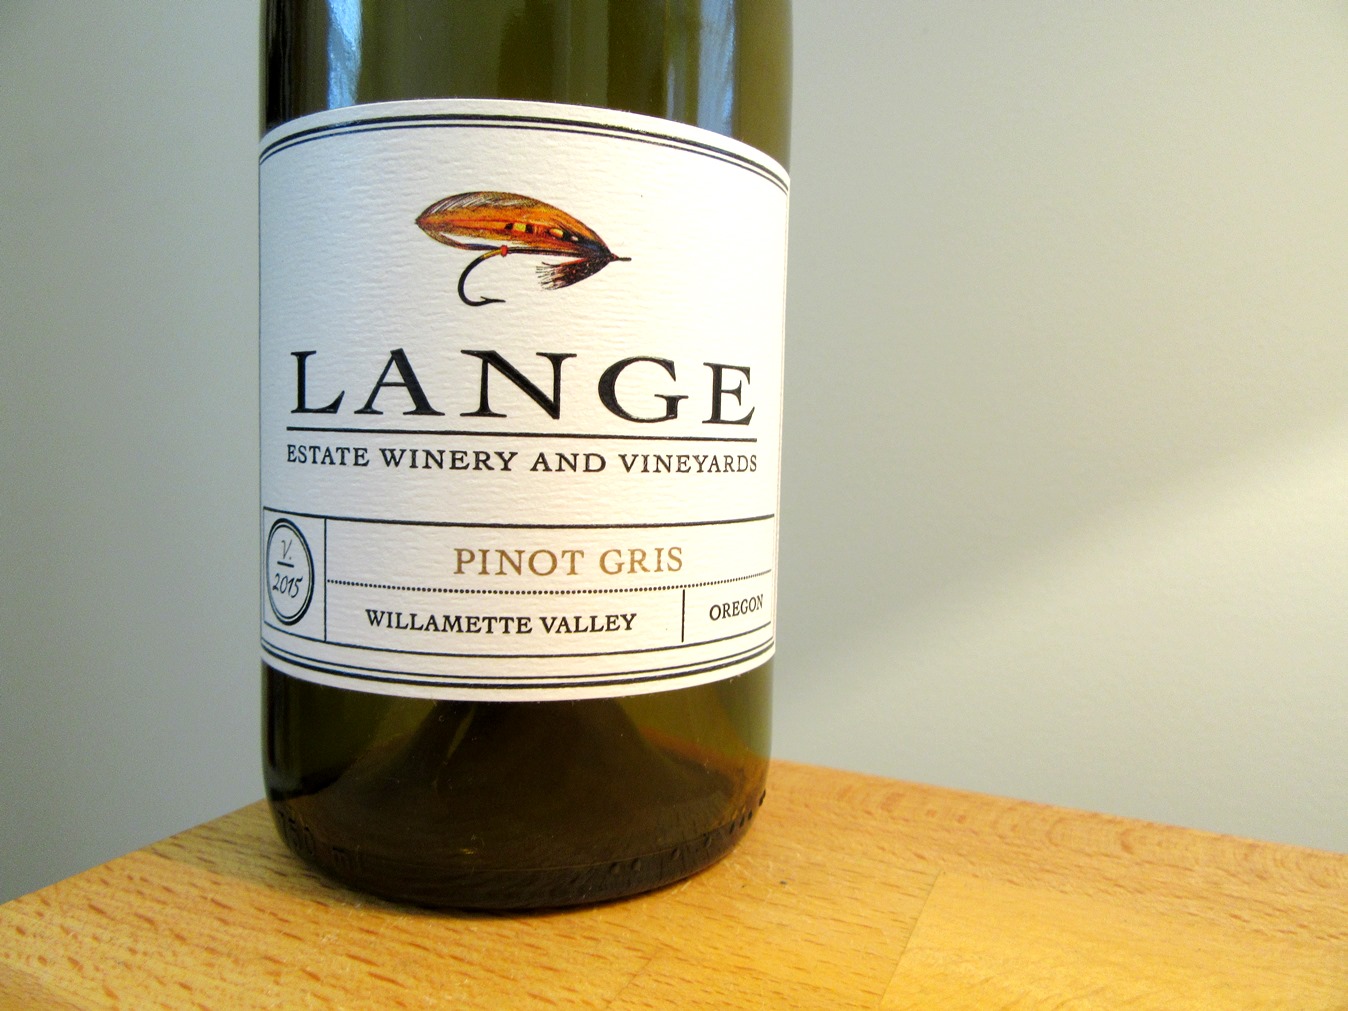 Lange Estate Winery and Vineyards, Pinot Gris 2015, Willamette Valley, Oregon, Wine Casual